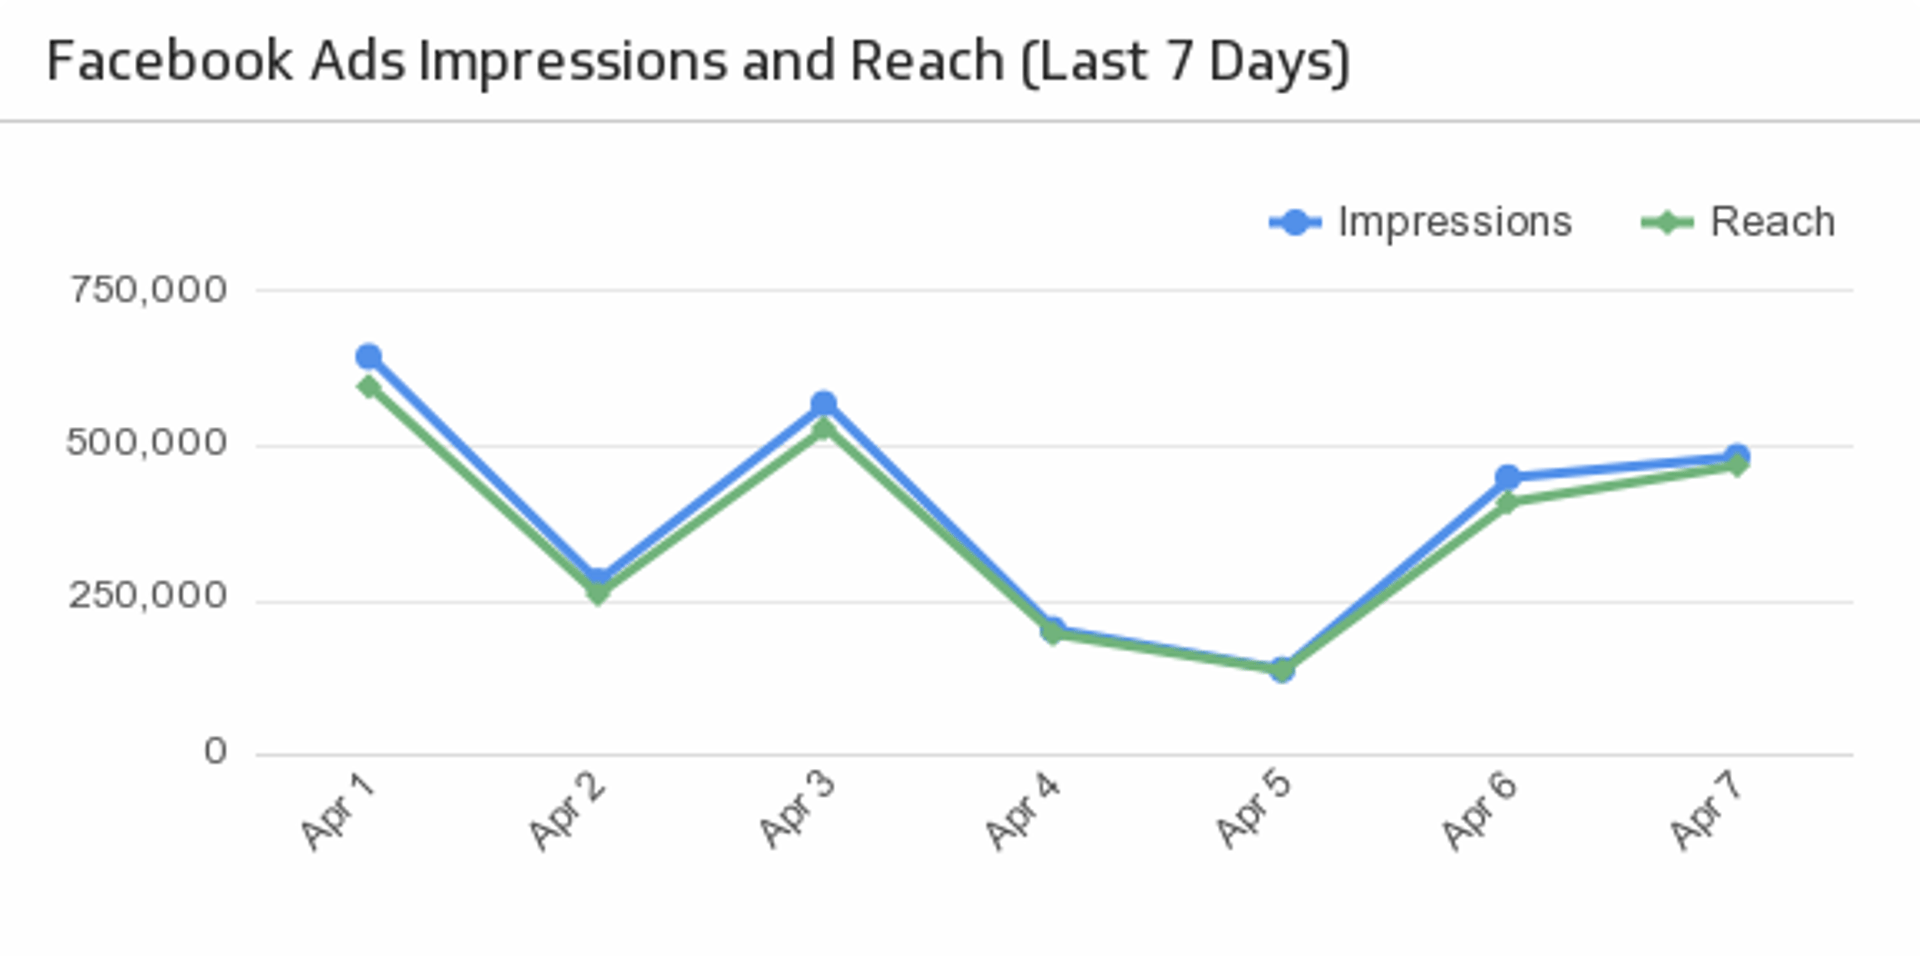 Impressions and Reach